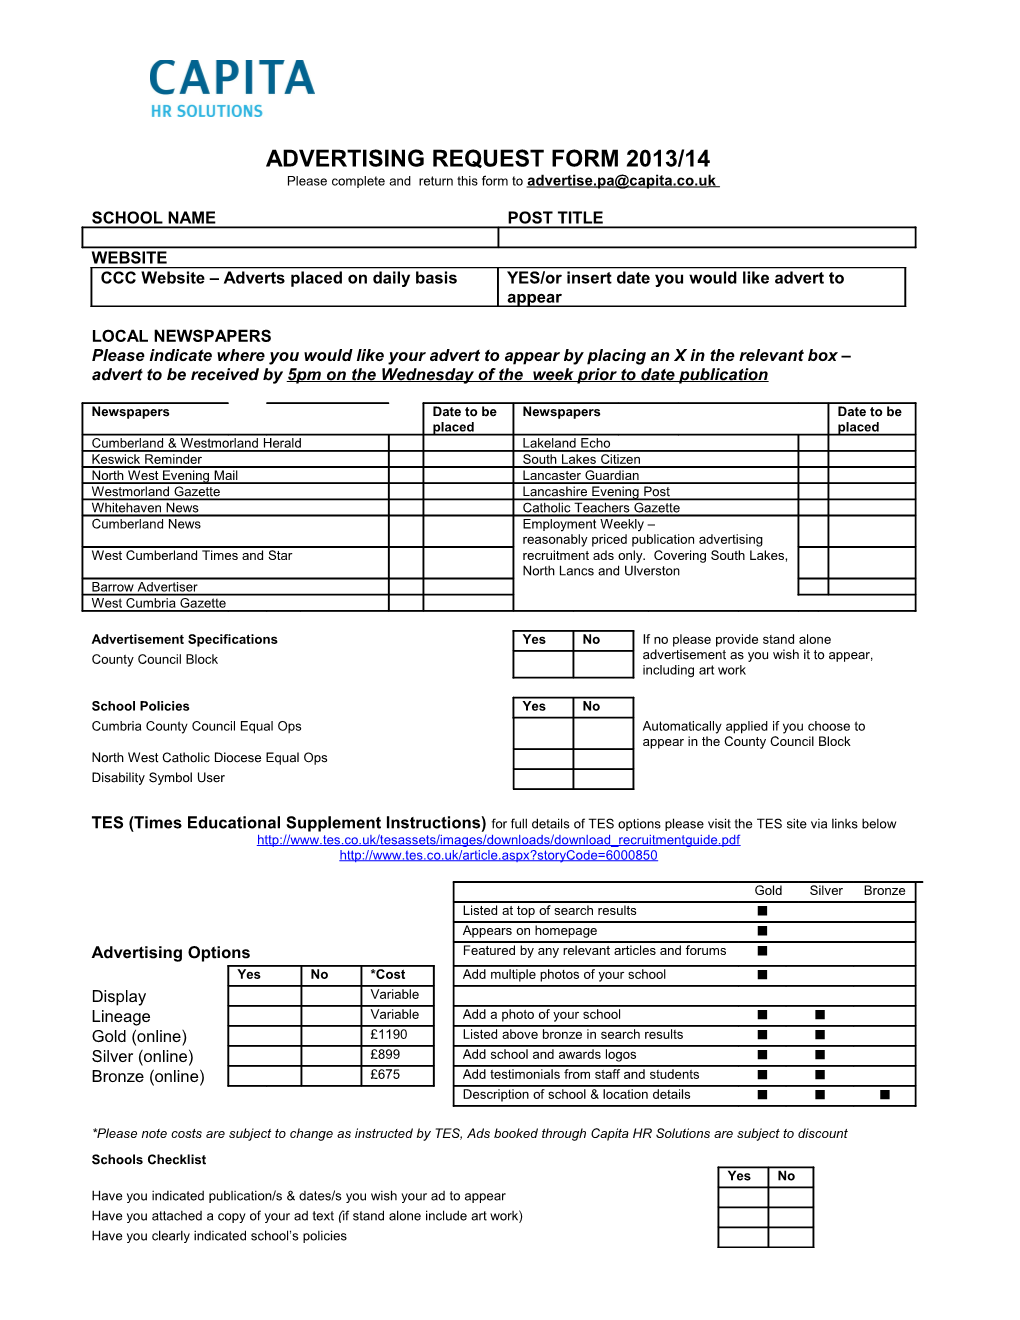 Please Complete and Return This Form to Advertise Uk